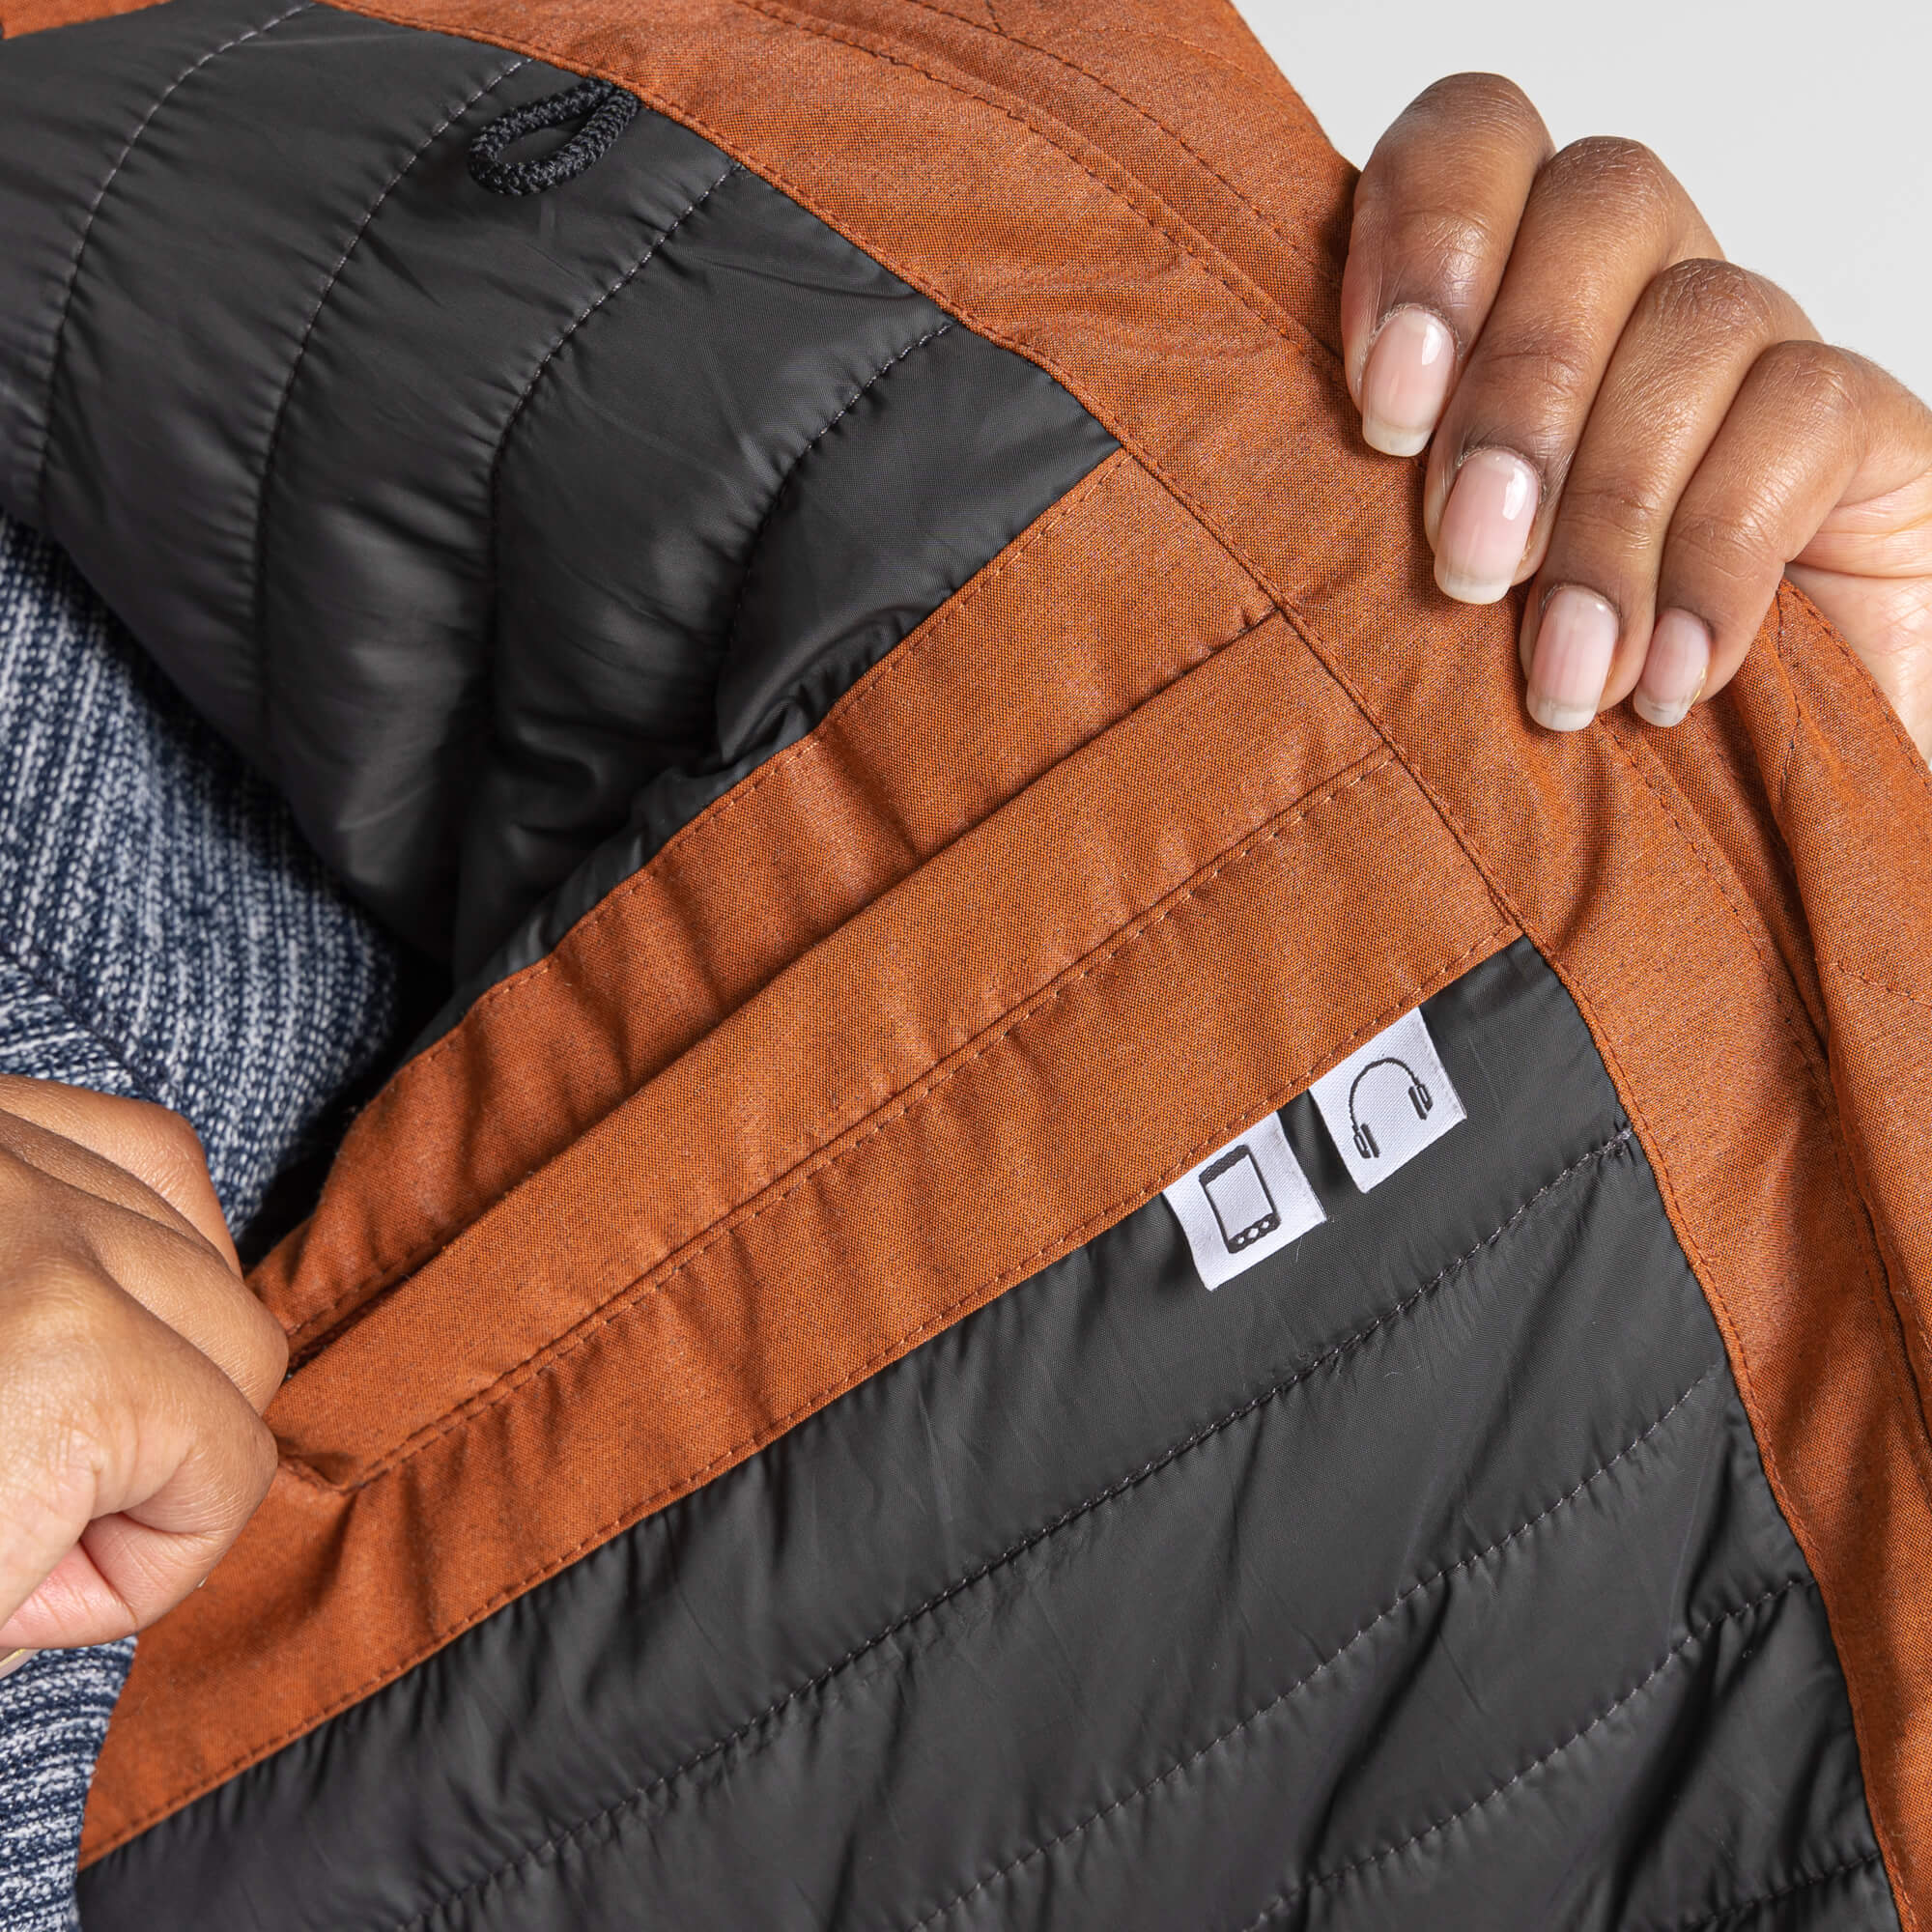 Women's Shayla Insulated Jacket | Gingerbread